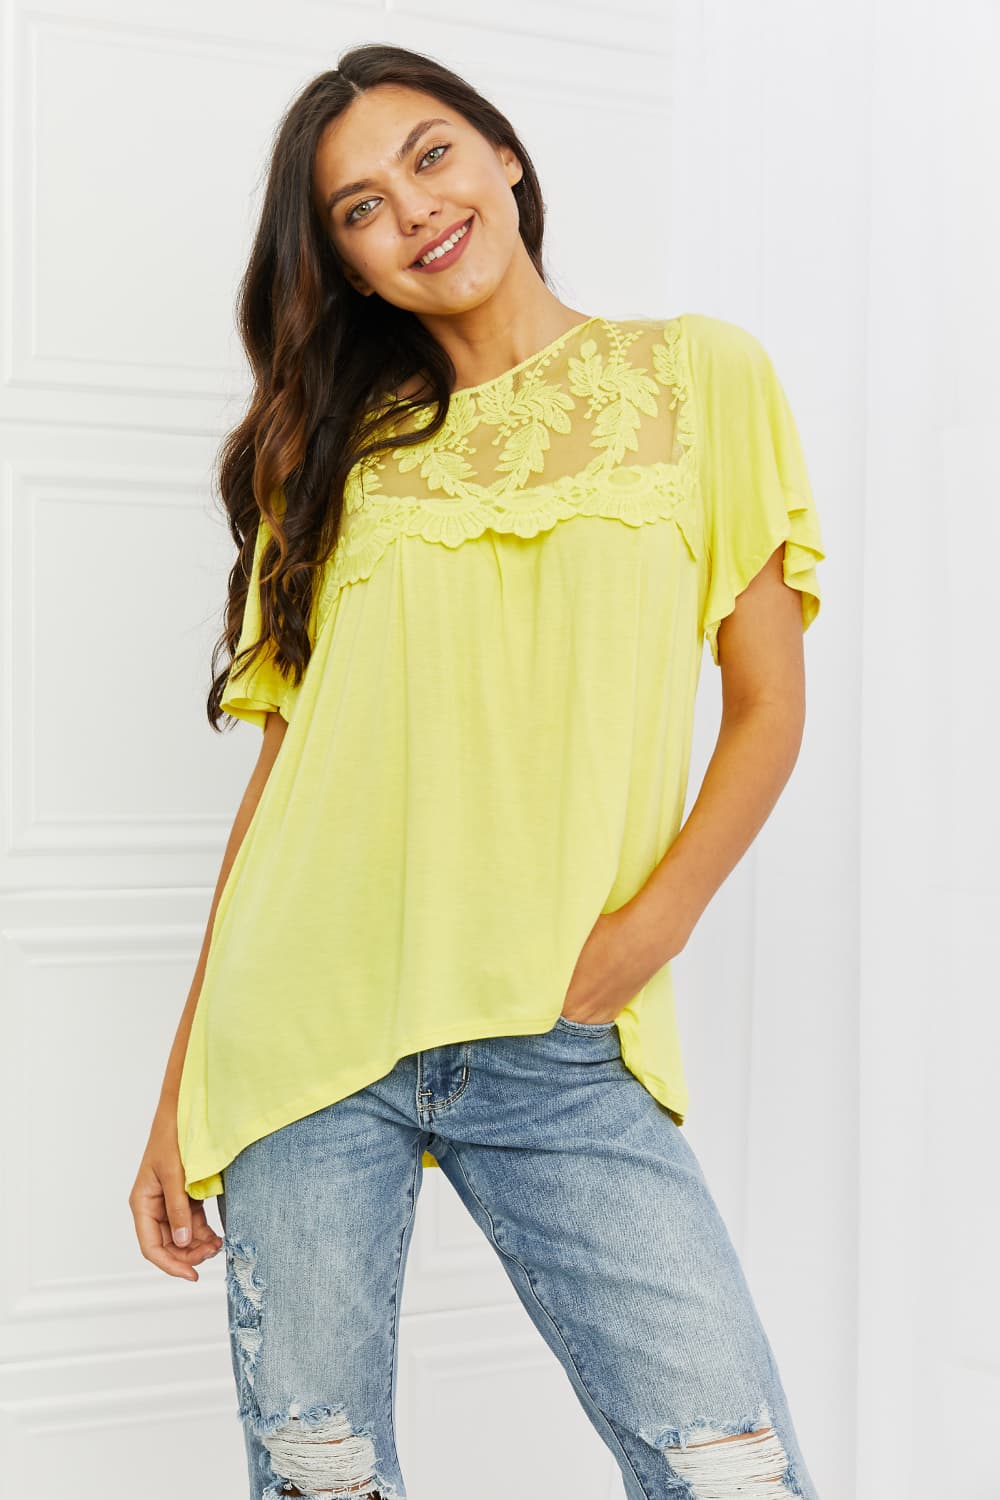 Culture Code "Ready To Go" Lace Embroidered Top in Yellow Mousse